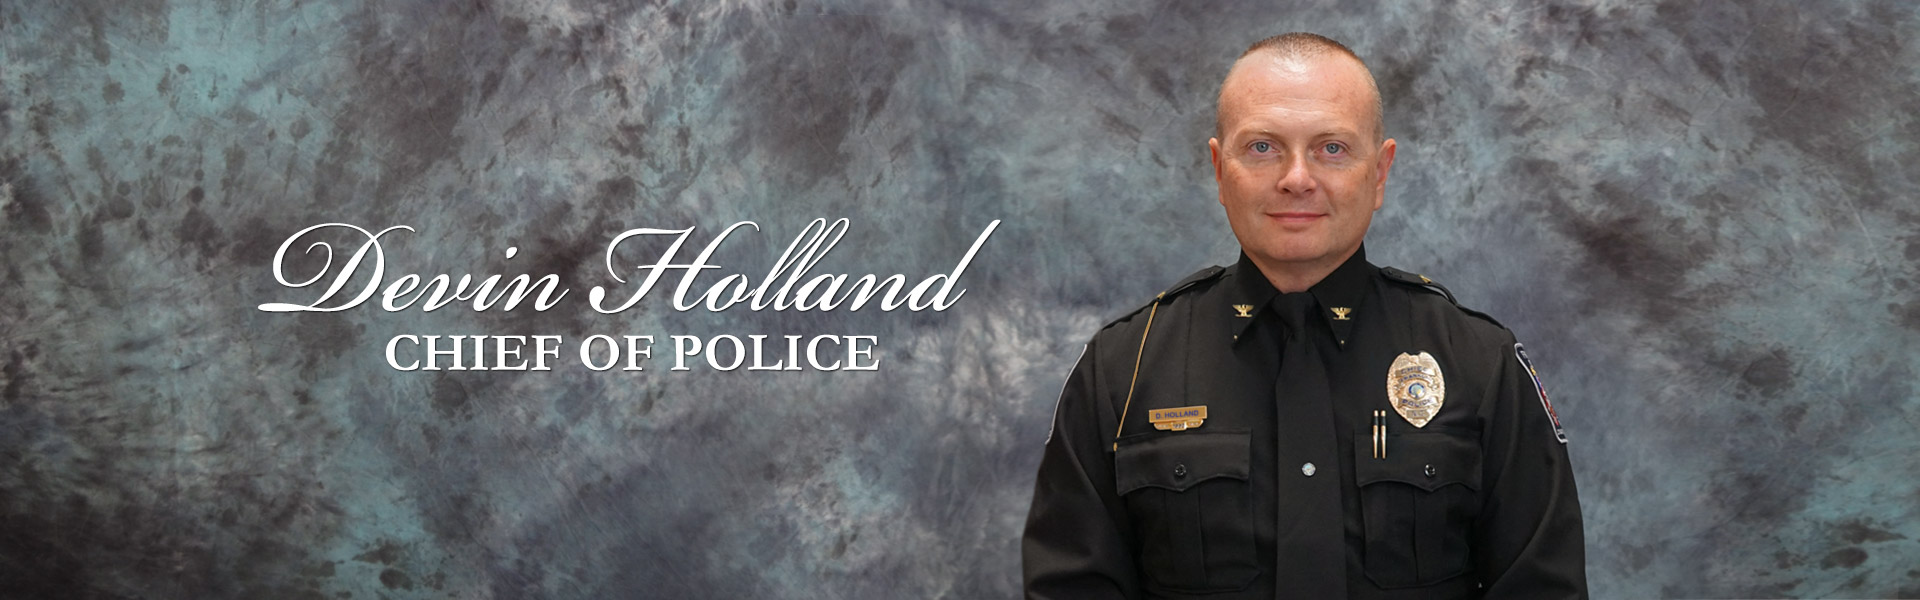 Town of Franklin Police Chief Devin Holland